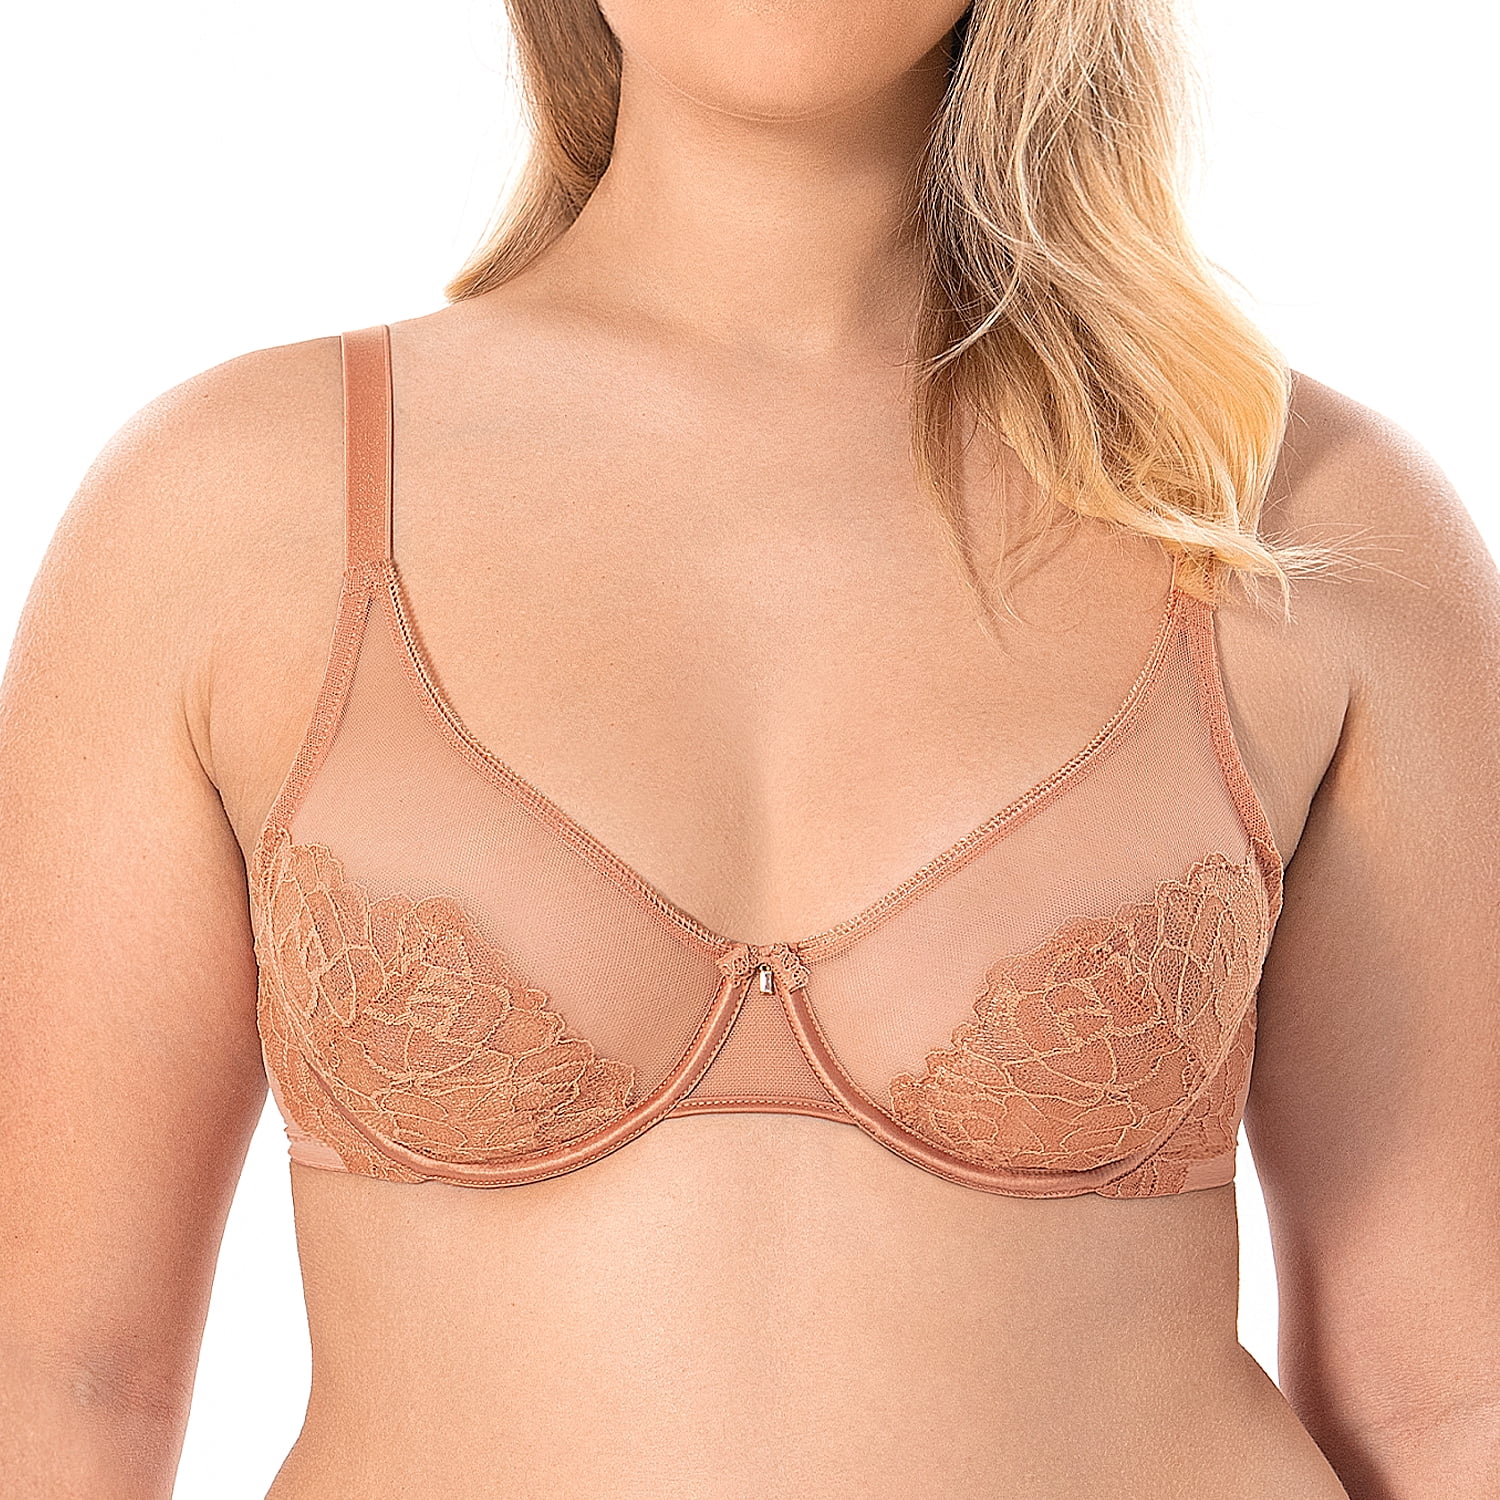 Wingslove Women's Sheer Lace Bra Minimizer See Through Unlined